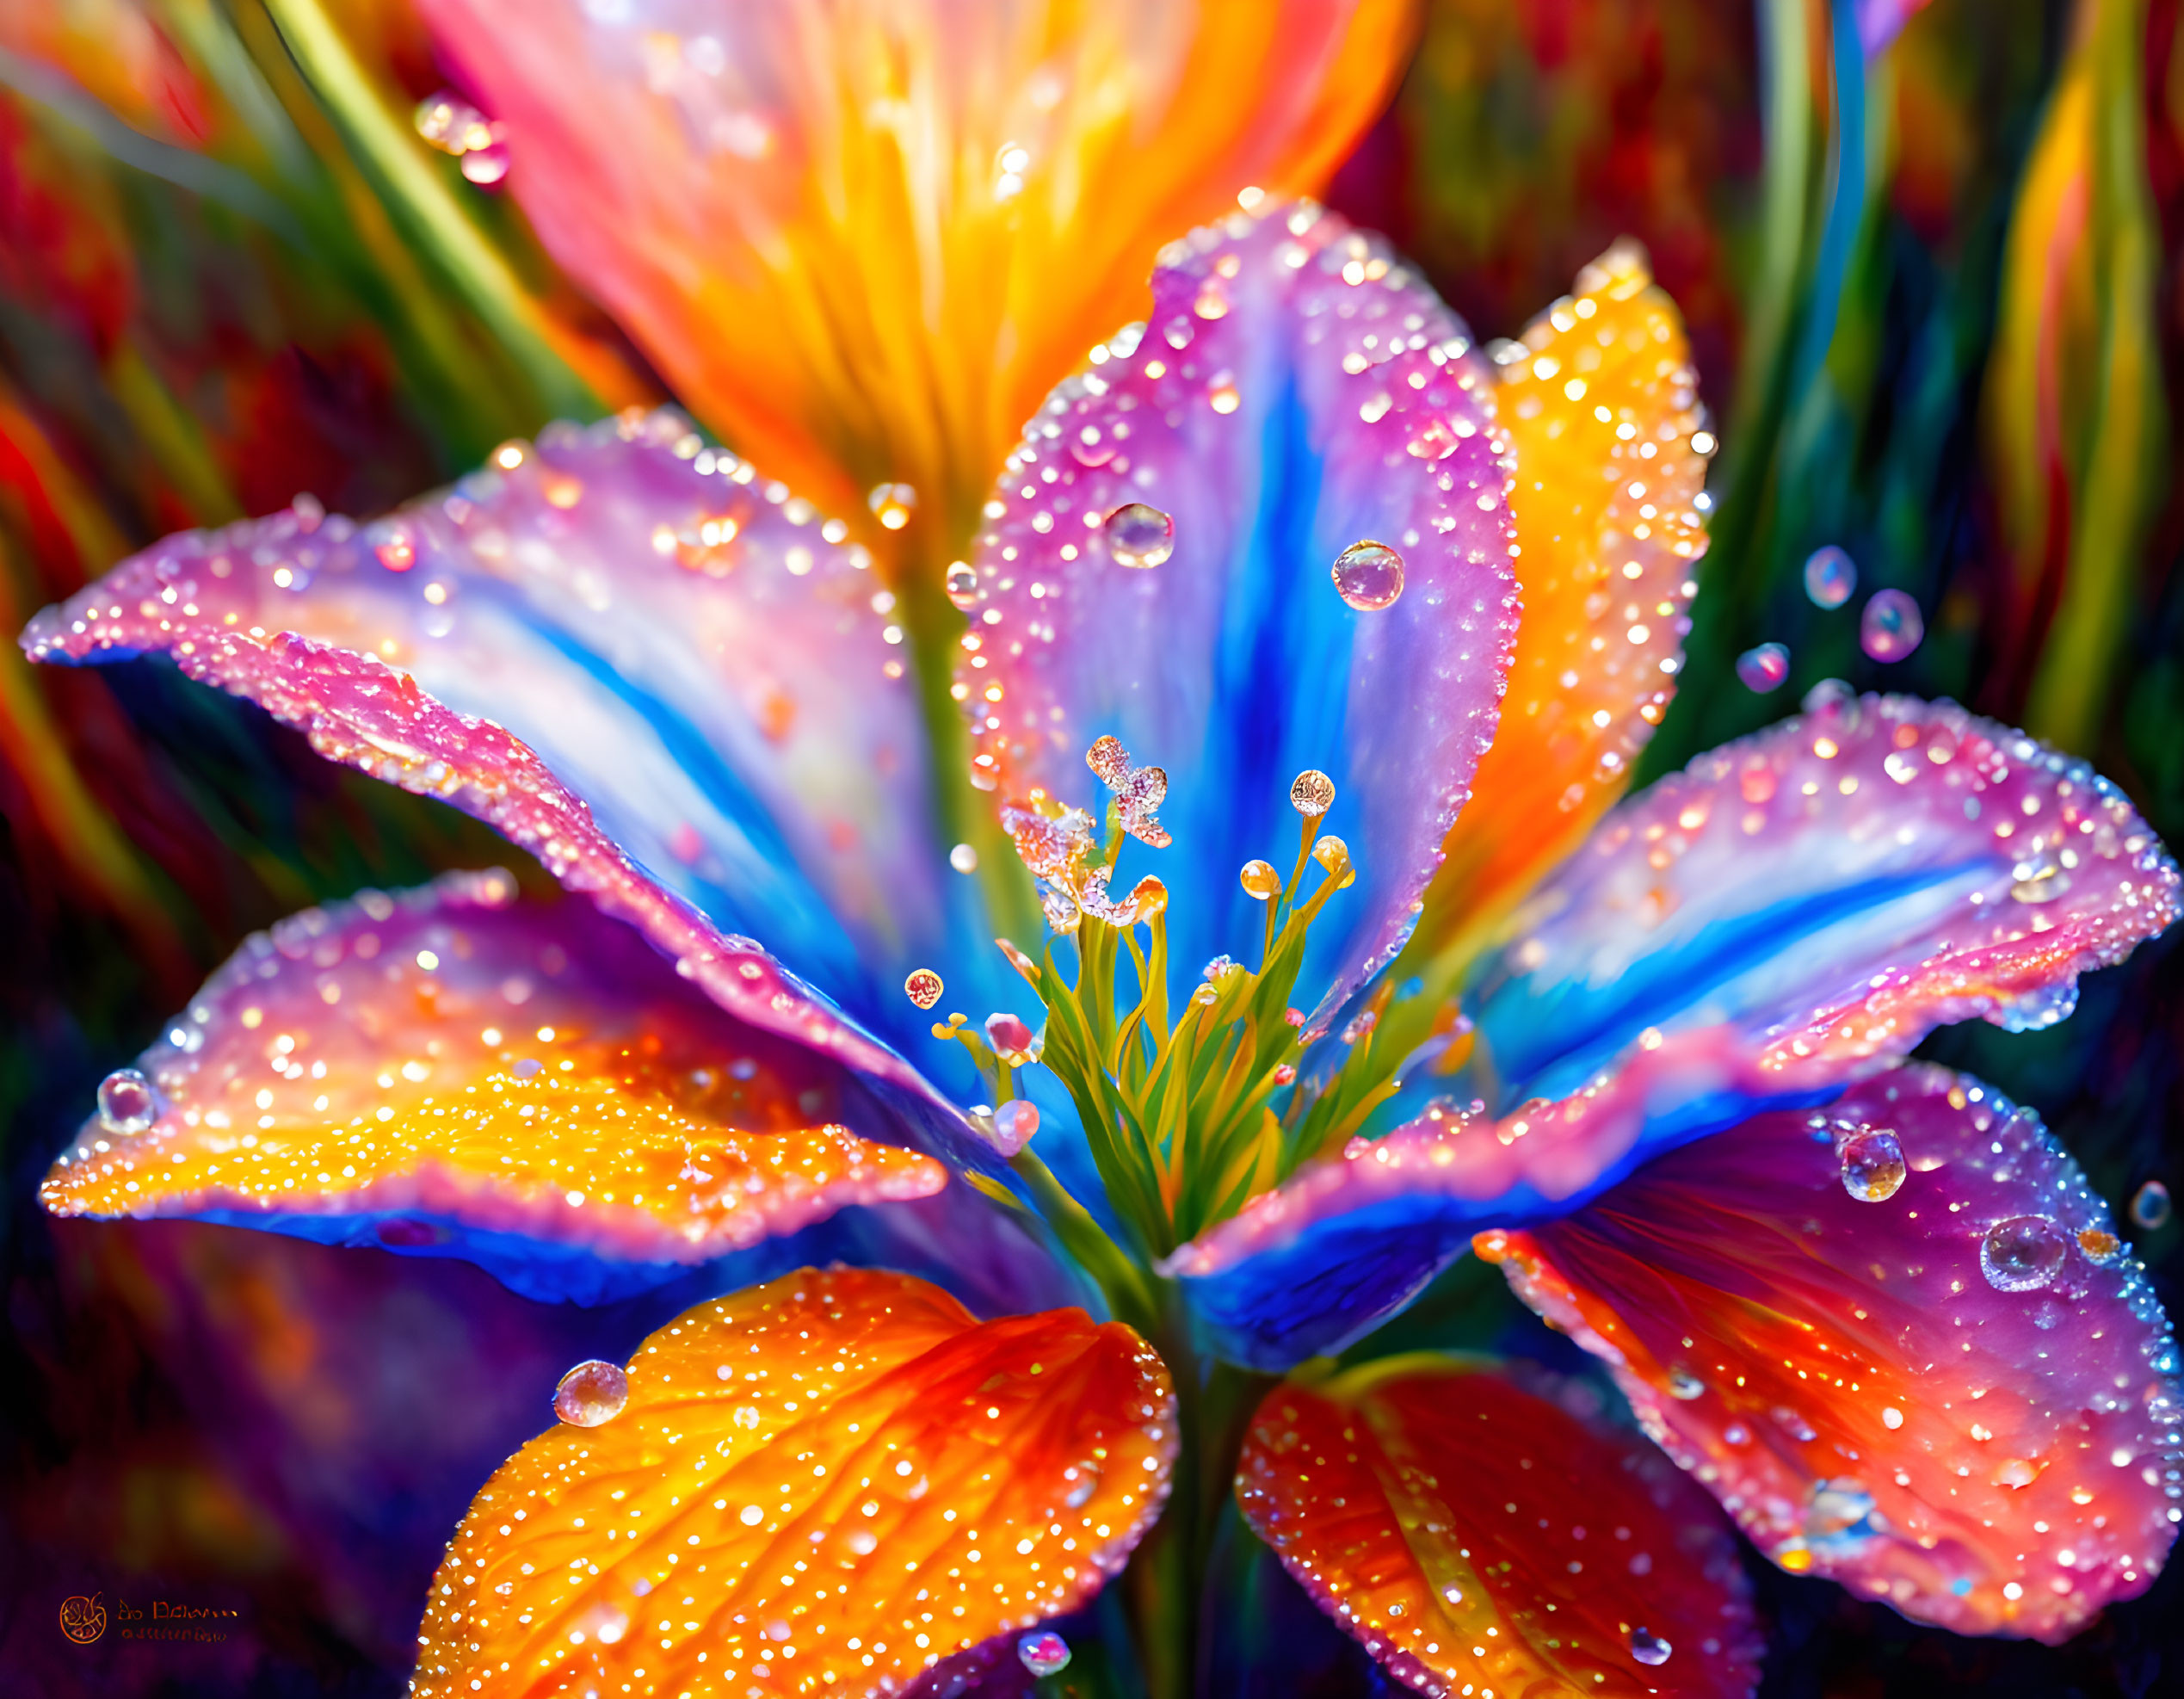 Colorful Flower with Sparkling Water Droplets on Petals